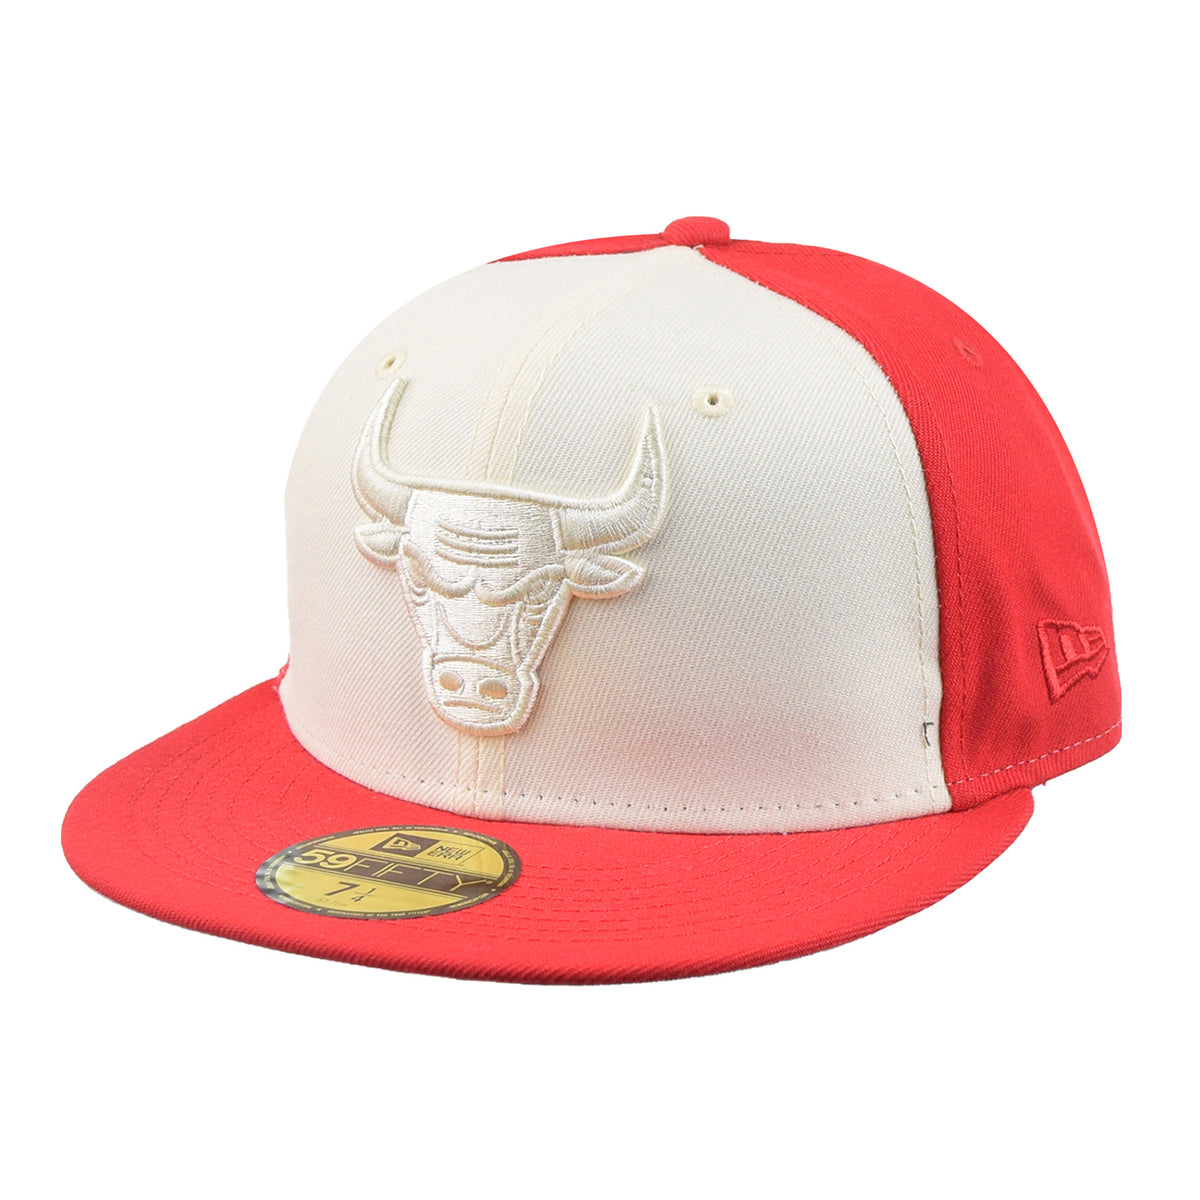 all red chicago bulls hat